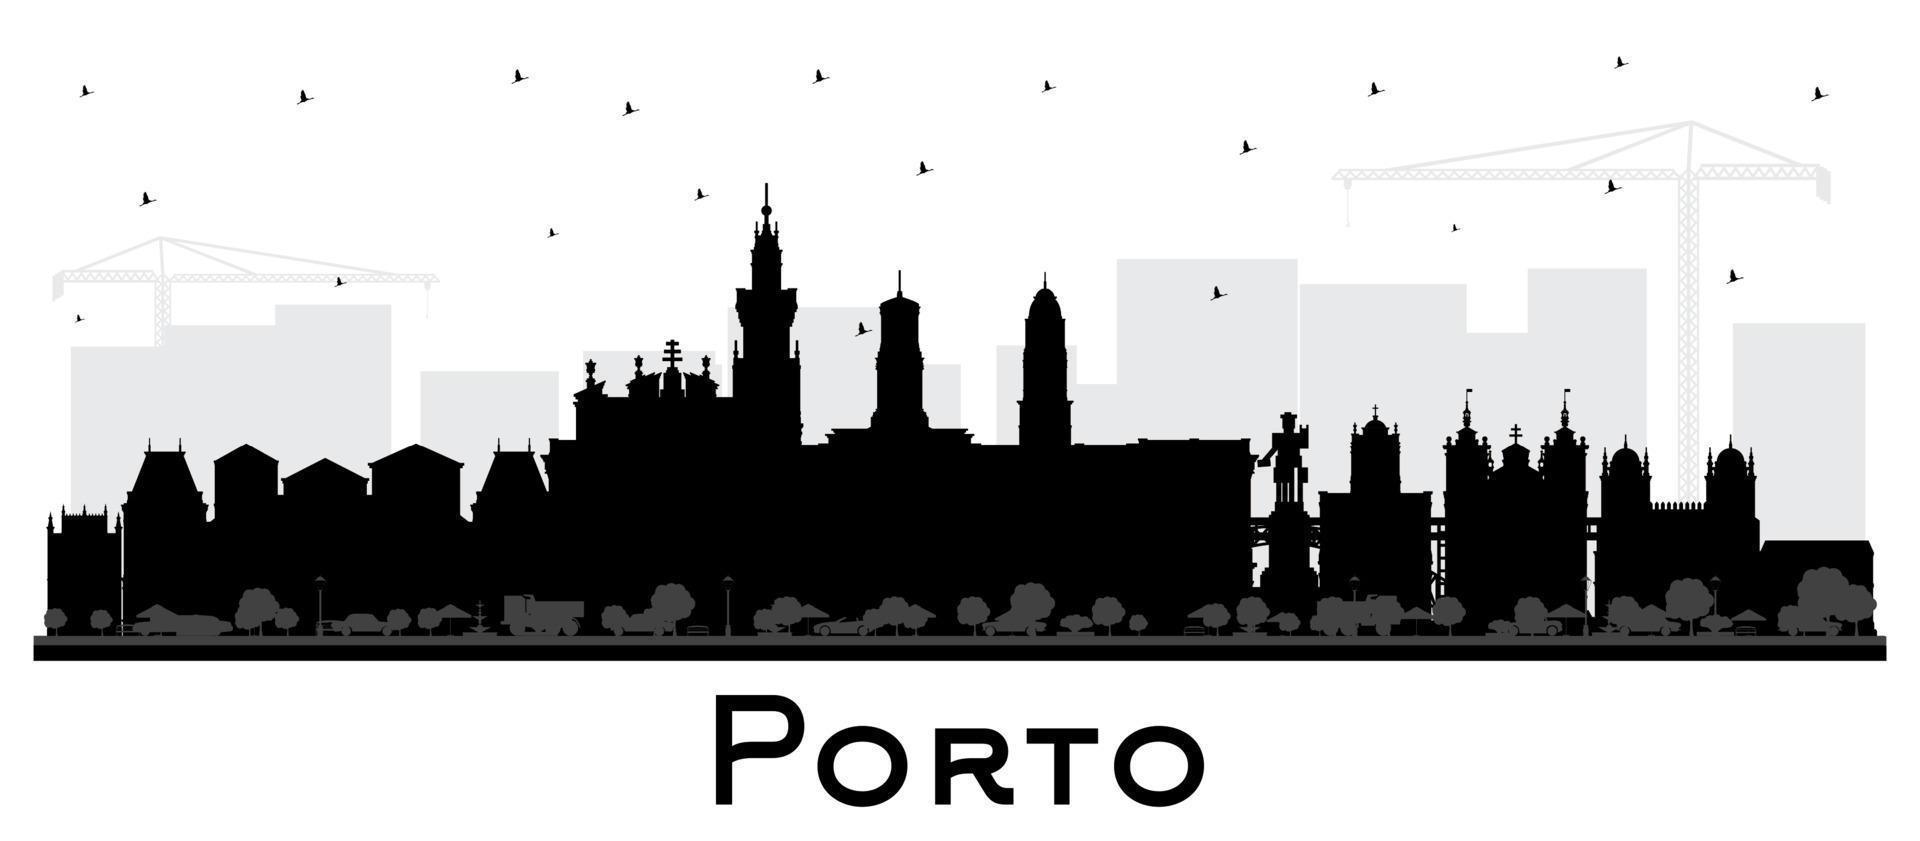 Porto Portugal City Skyline Silhouette with Black Buildings Isolated on White. vector